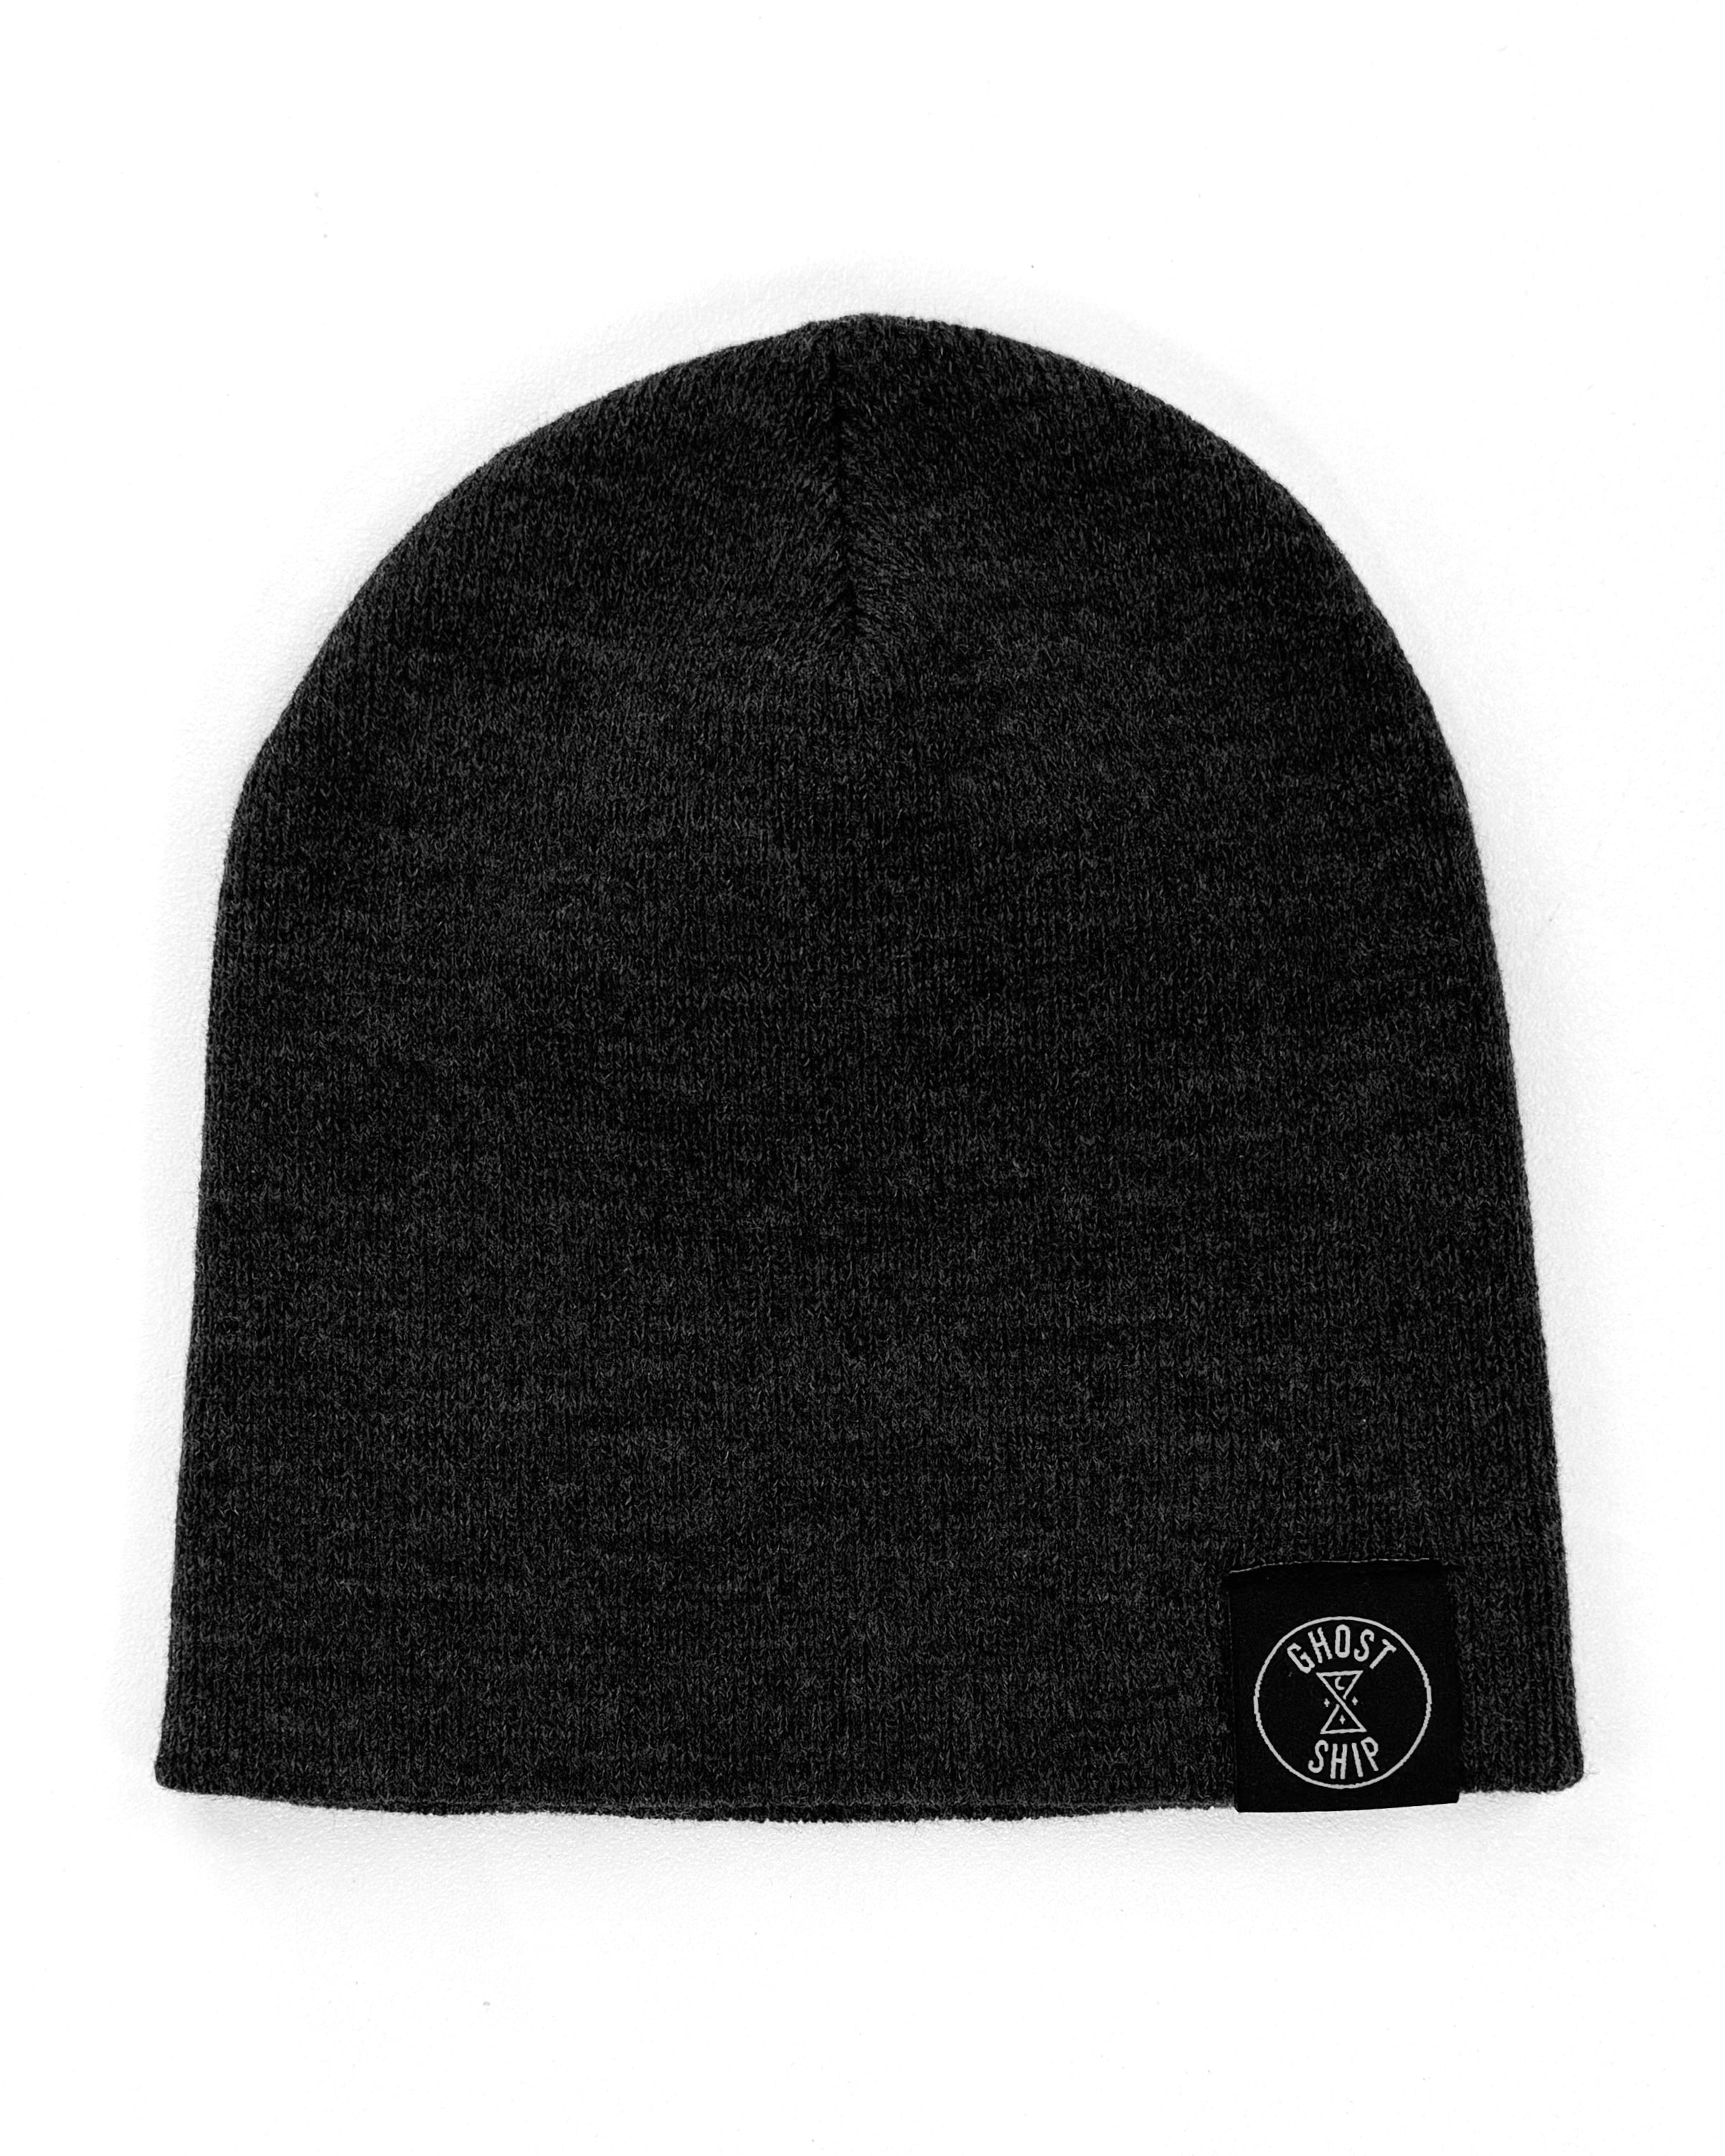 Insignia Beanie - Charcoal - GHOSTSHIP.Supply